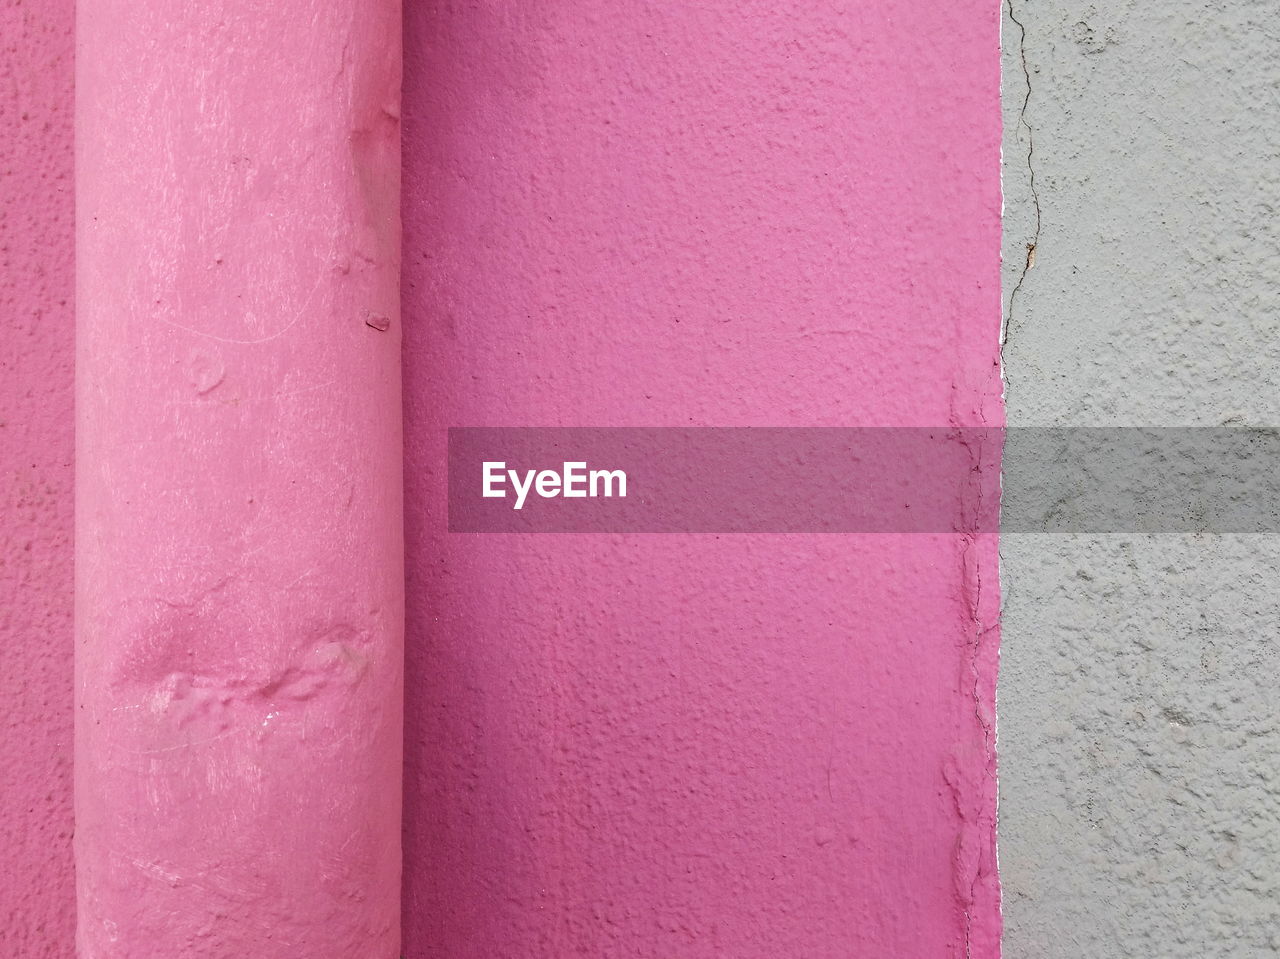 FULL FRAME SHOT OF PINK TEXTURED WALL